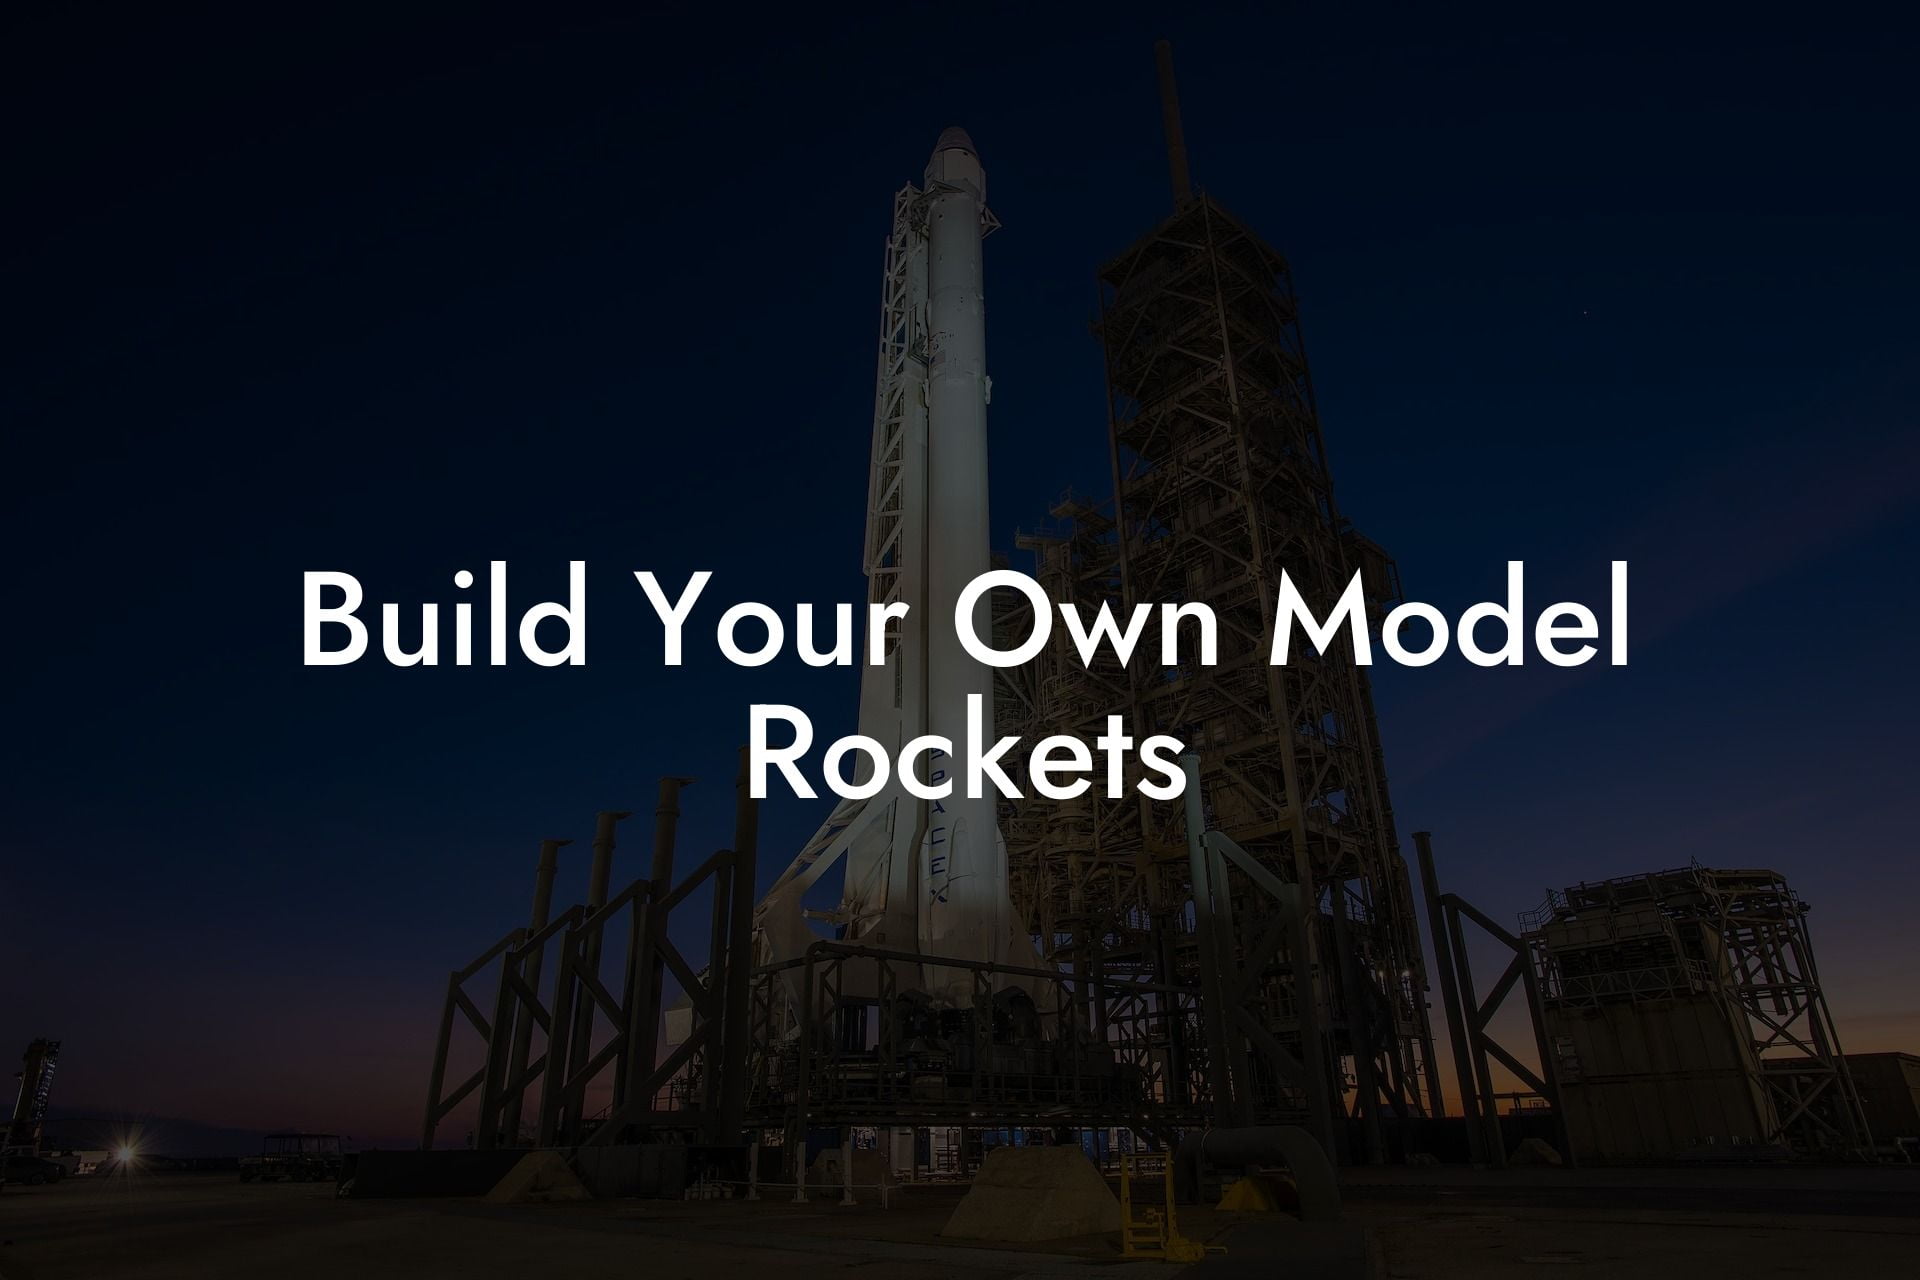 Build Your Own Model Rockets